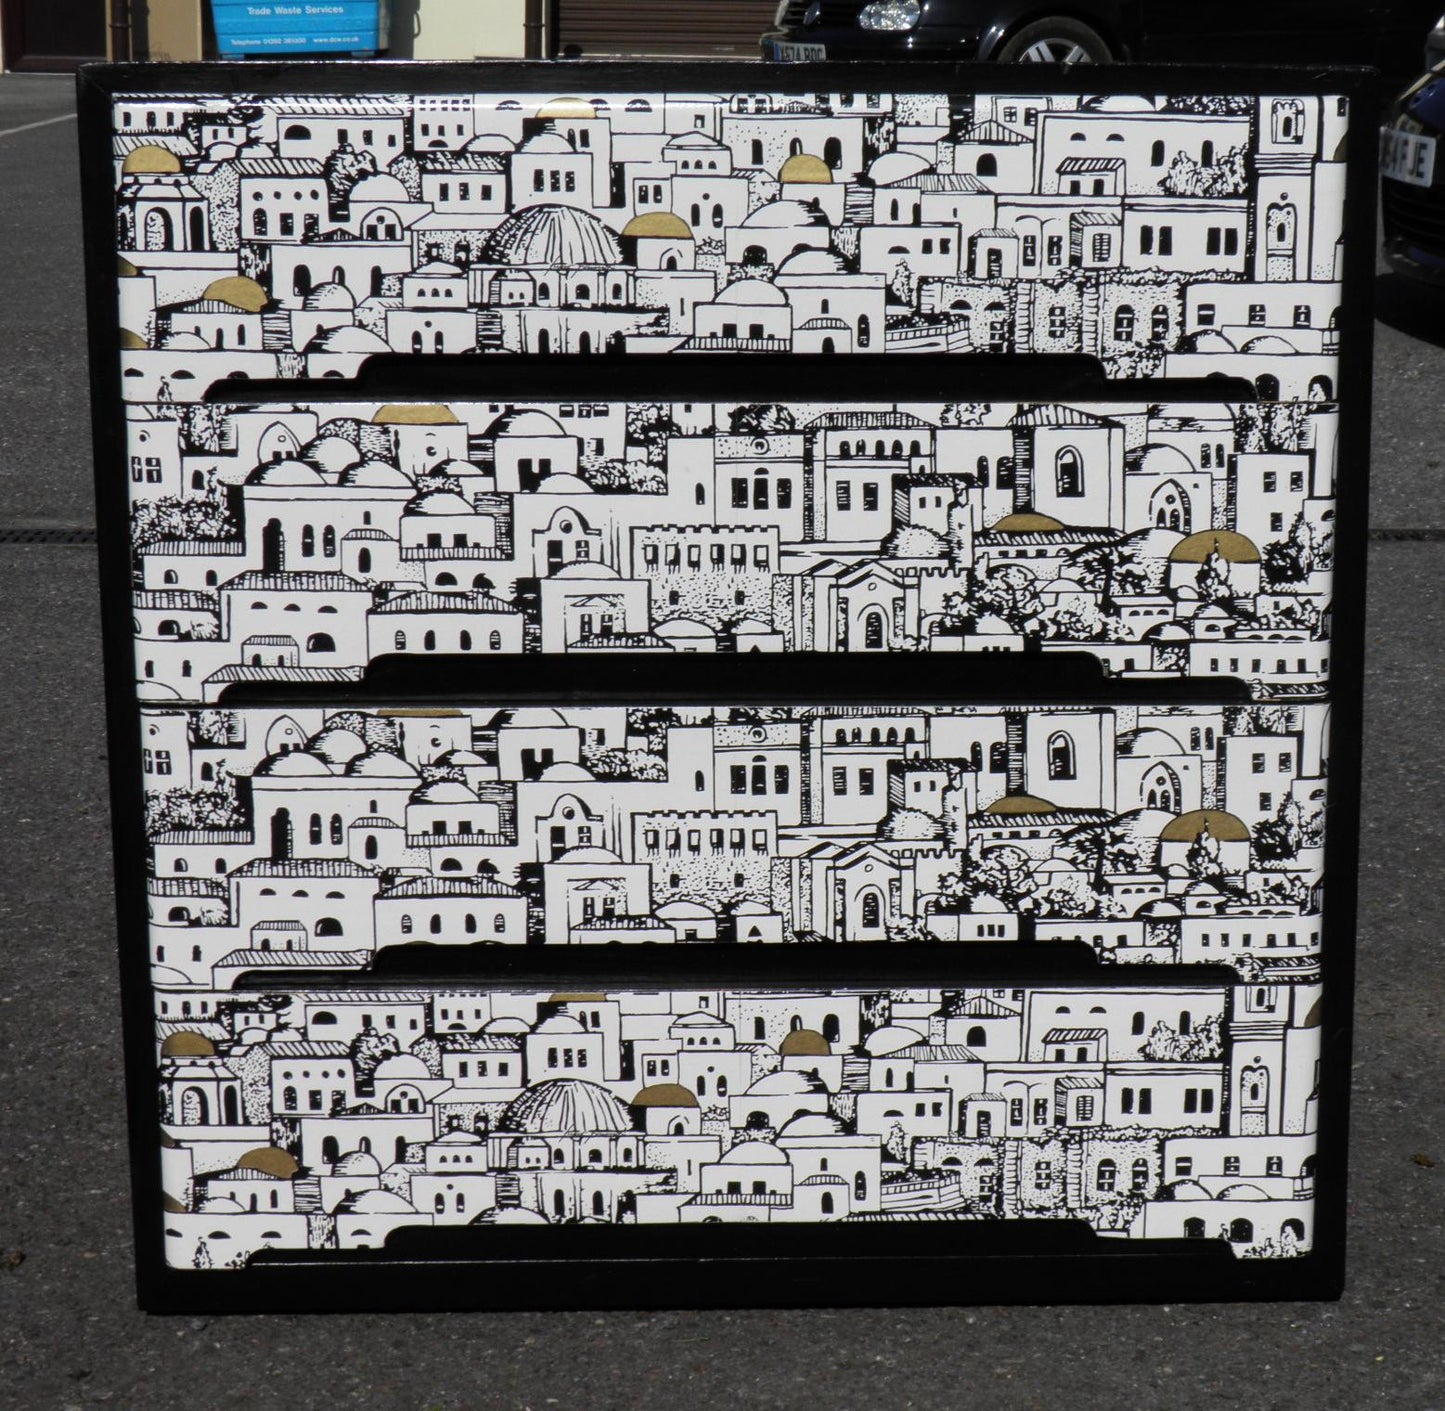 RETRO FORNASETTI DECOUPAGE CHEST OF DRAWERS BY CENTA